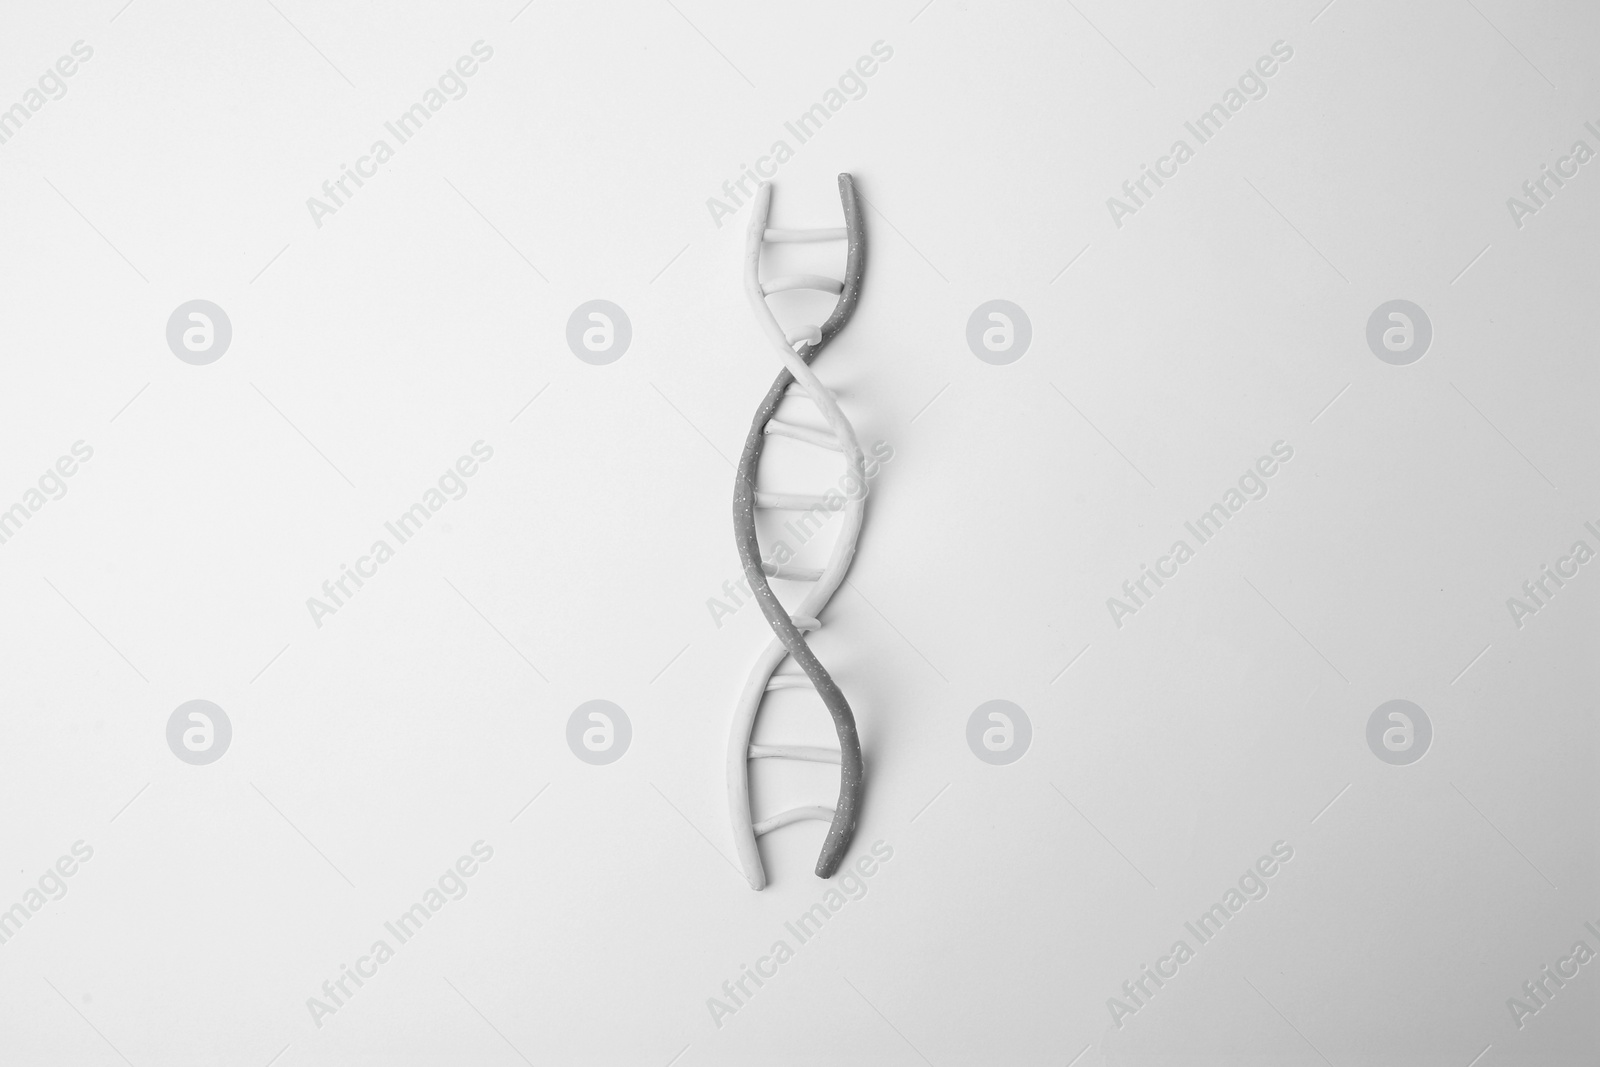 Photo of DNA molecule model made of colorful plasticine on white background, top view